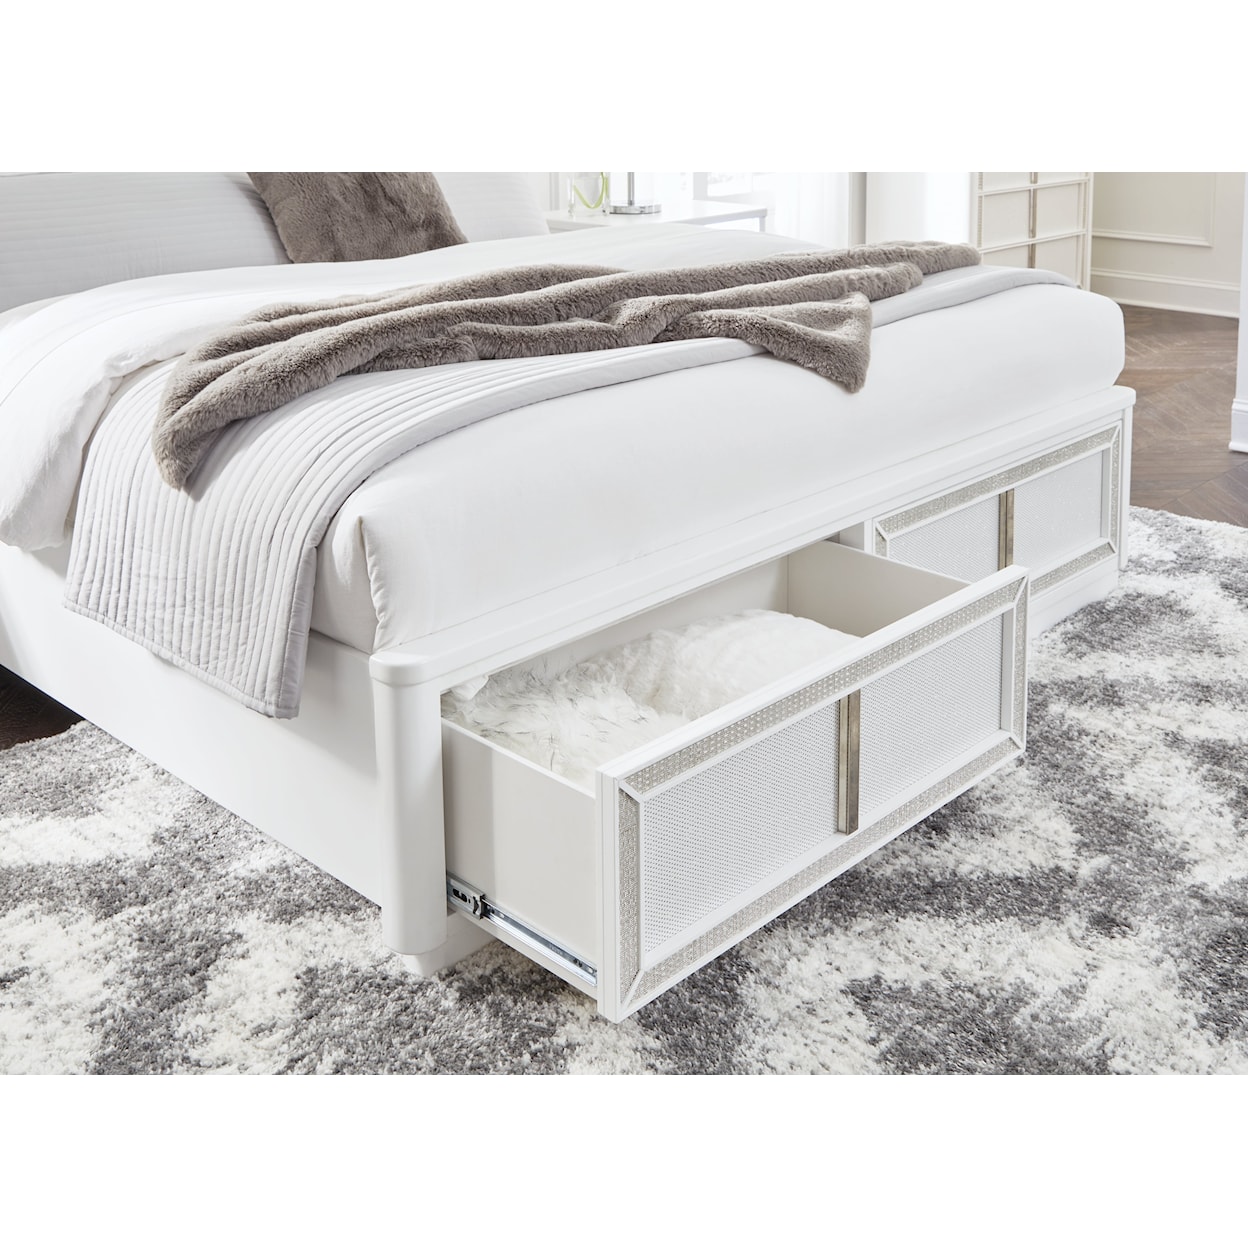 Ashley Furniture Signature Design Chalanna Queen Upholstered Storage Bed